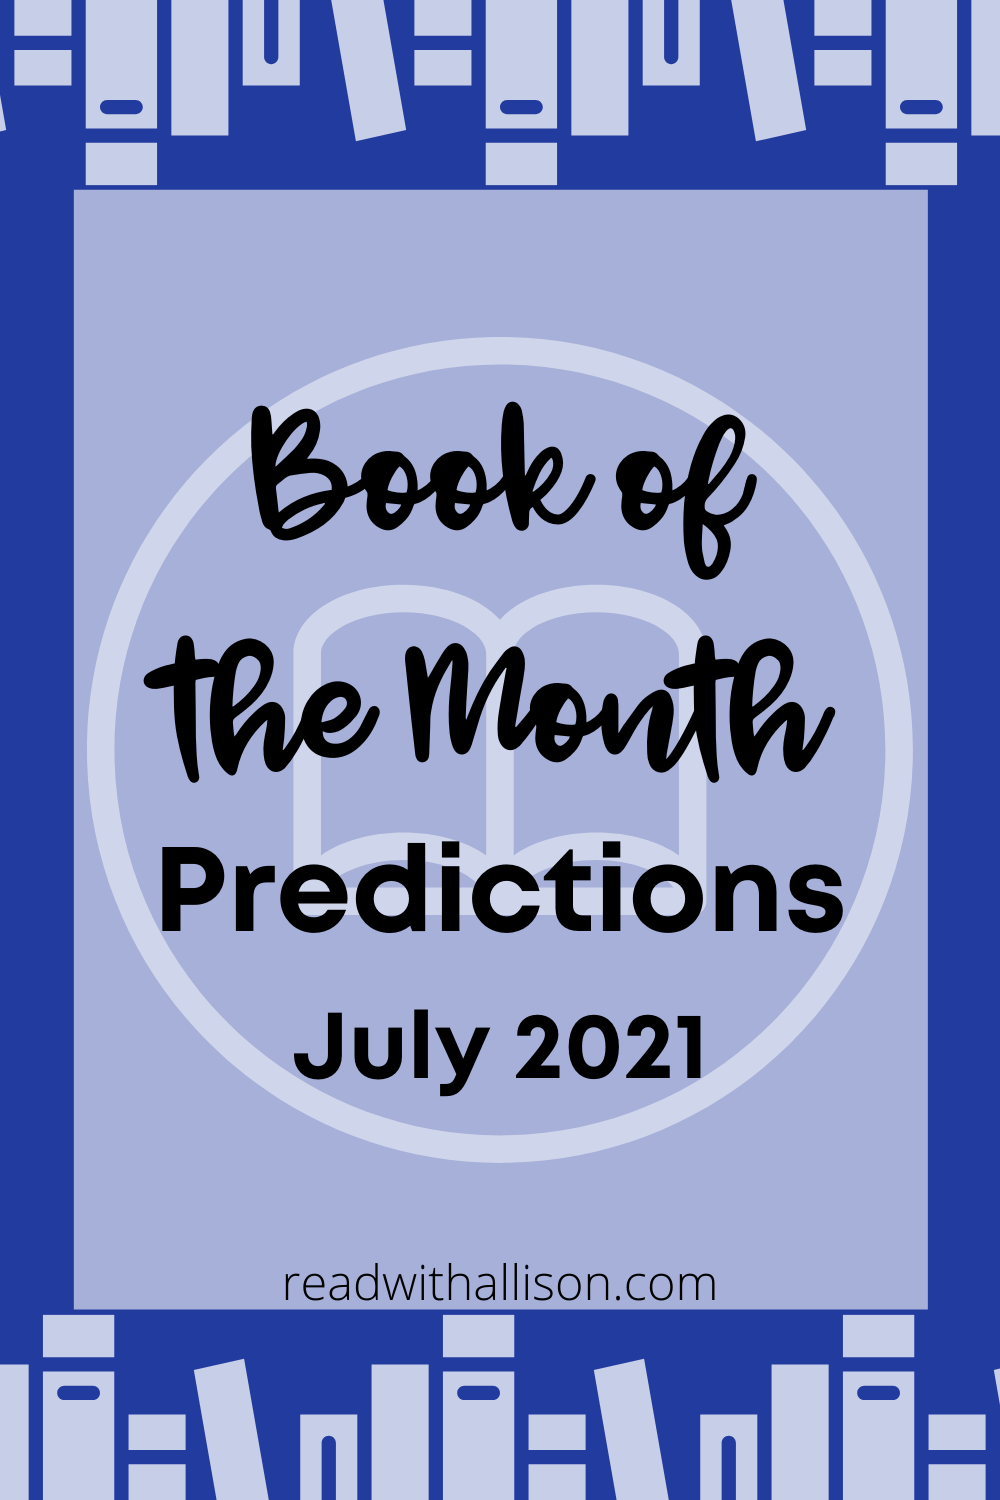 Book of the Month July 2021 Predictions Read With Allison